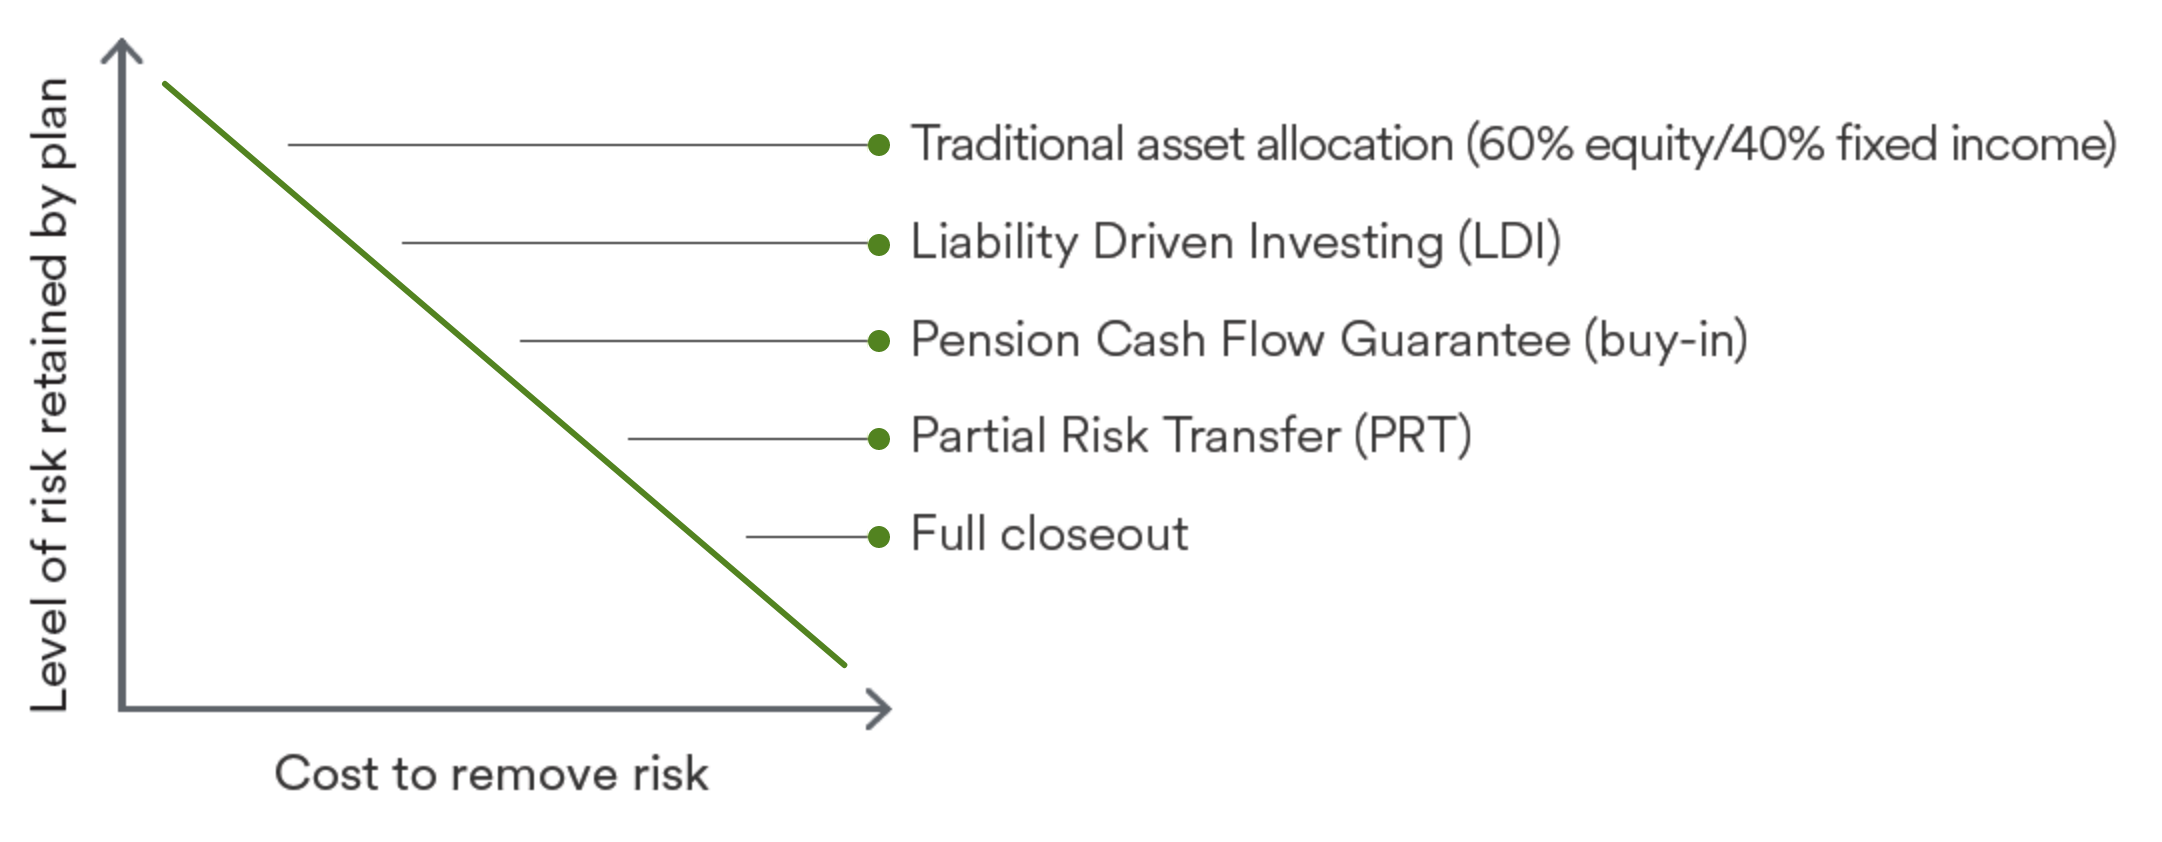 Grpah to depict the level of risk and cost accomapined to remove the risk